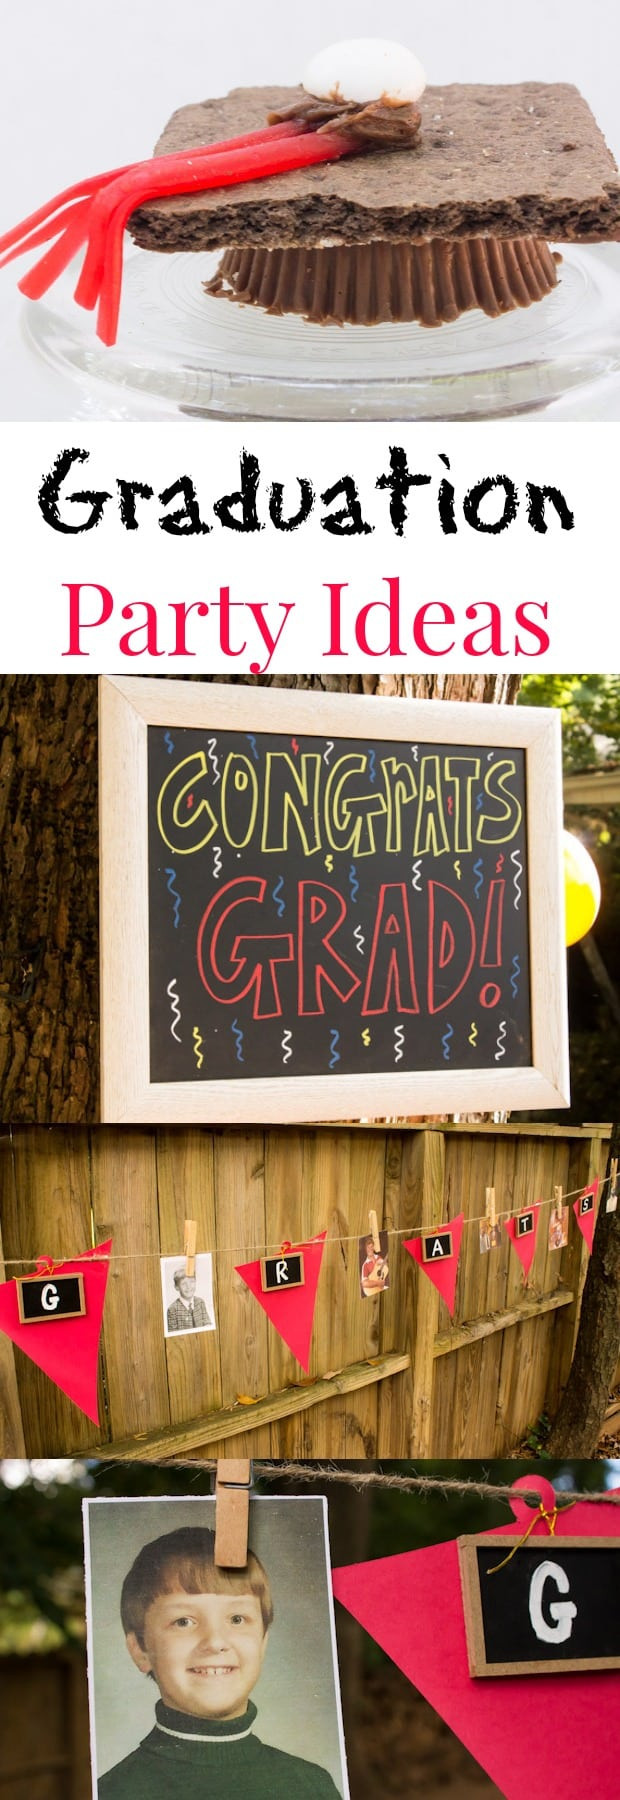 Picture Collage Ideas For Graduation Party
 Graduation Party Ideas for All Ages